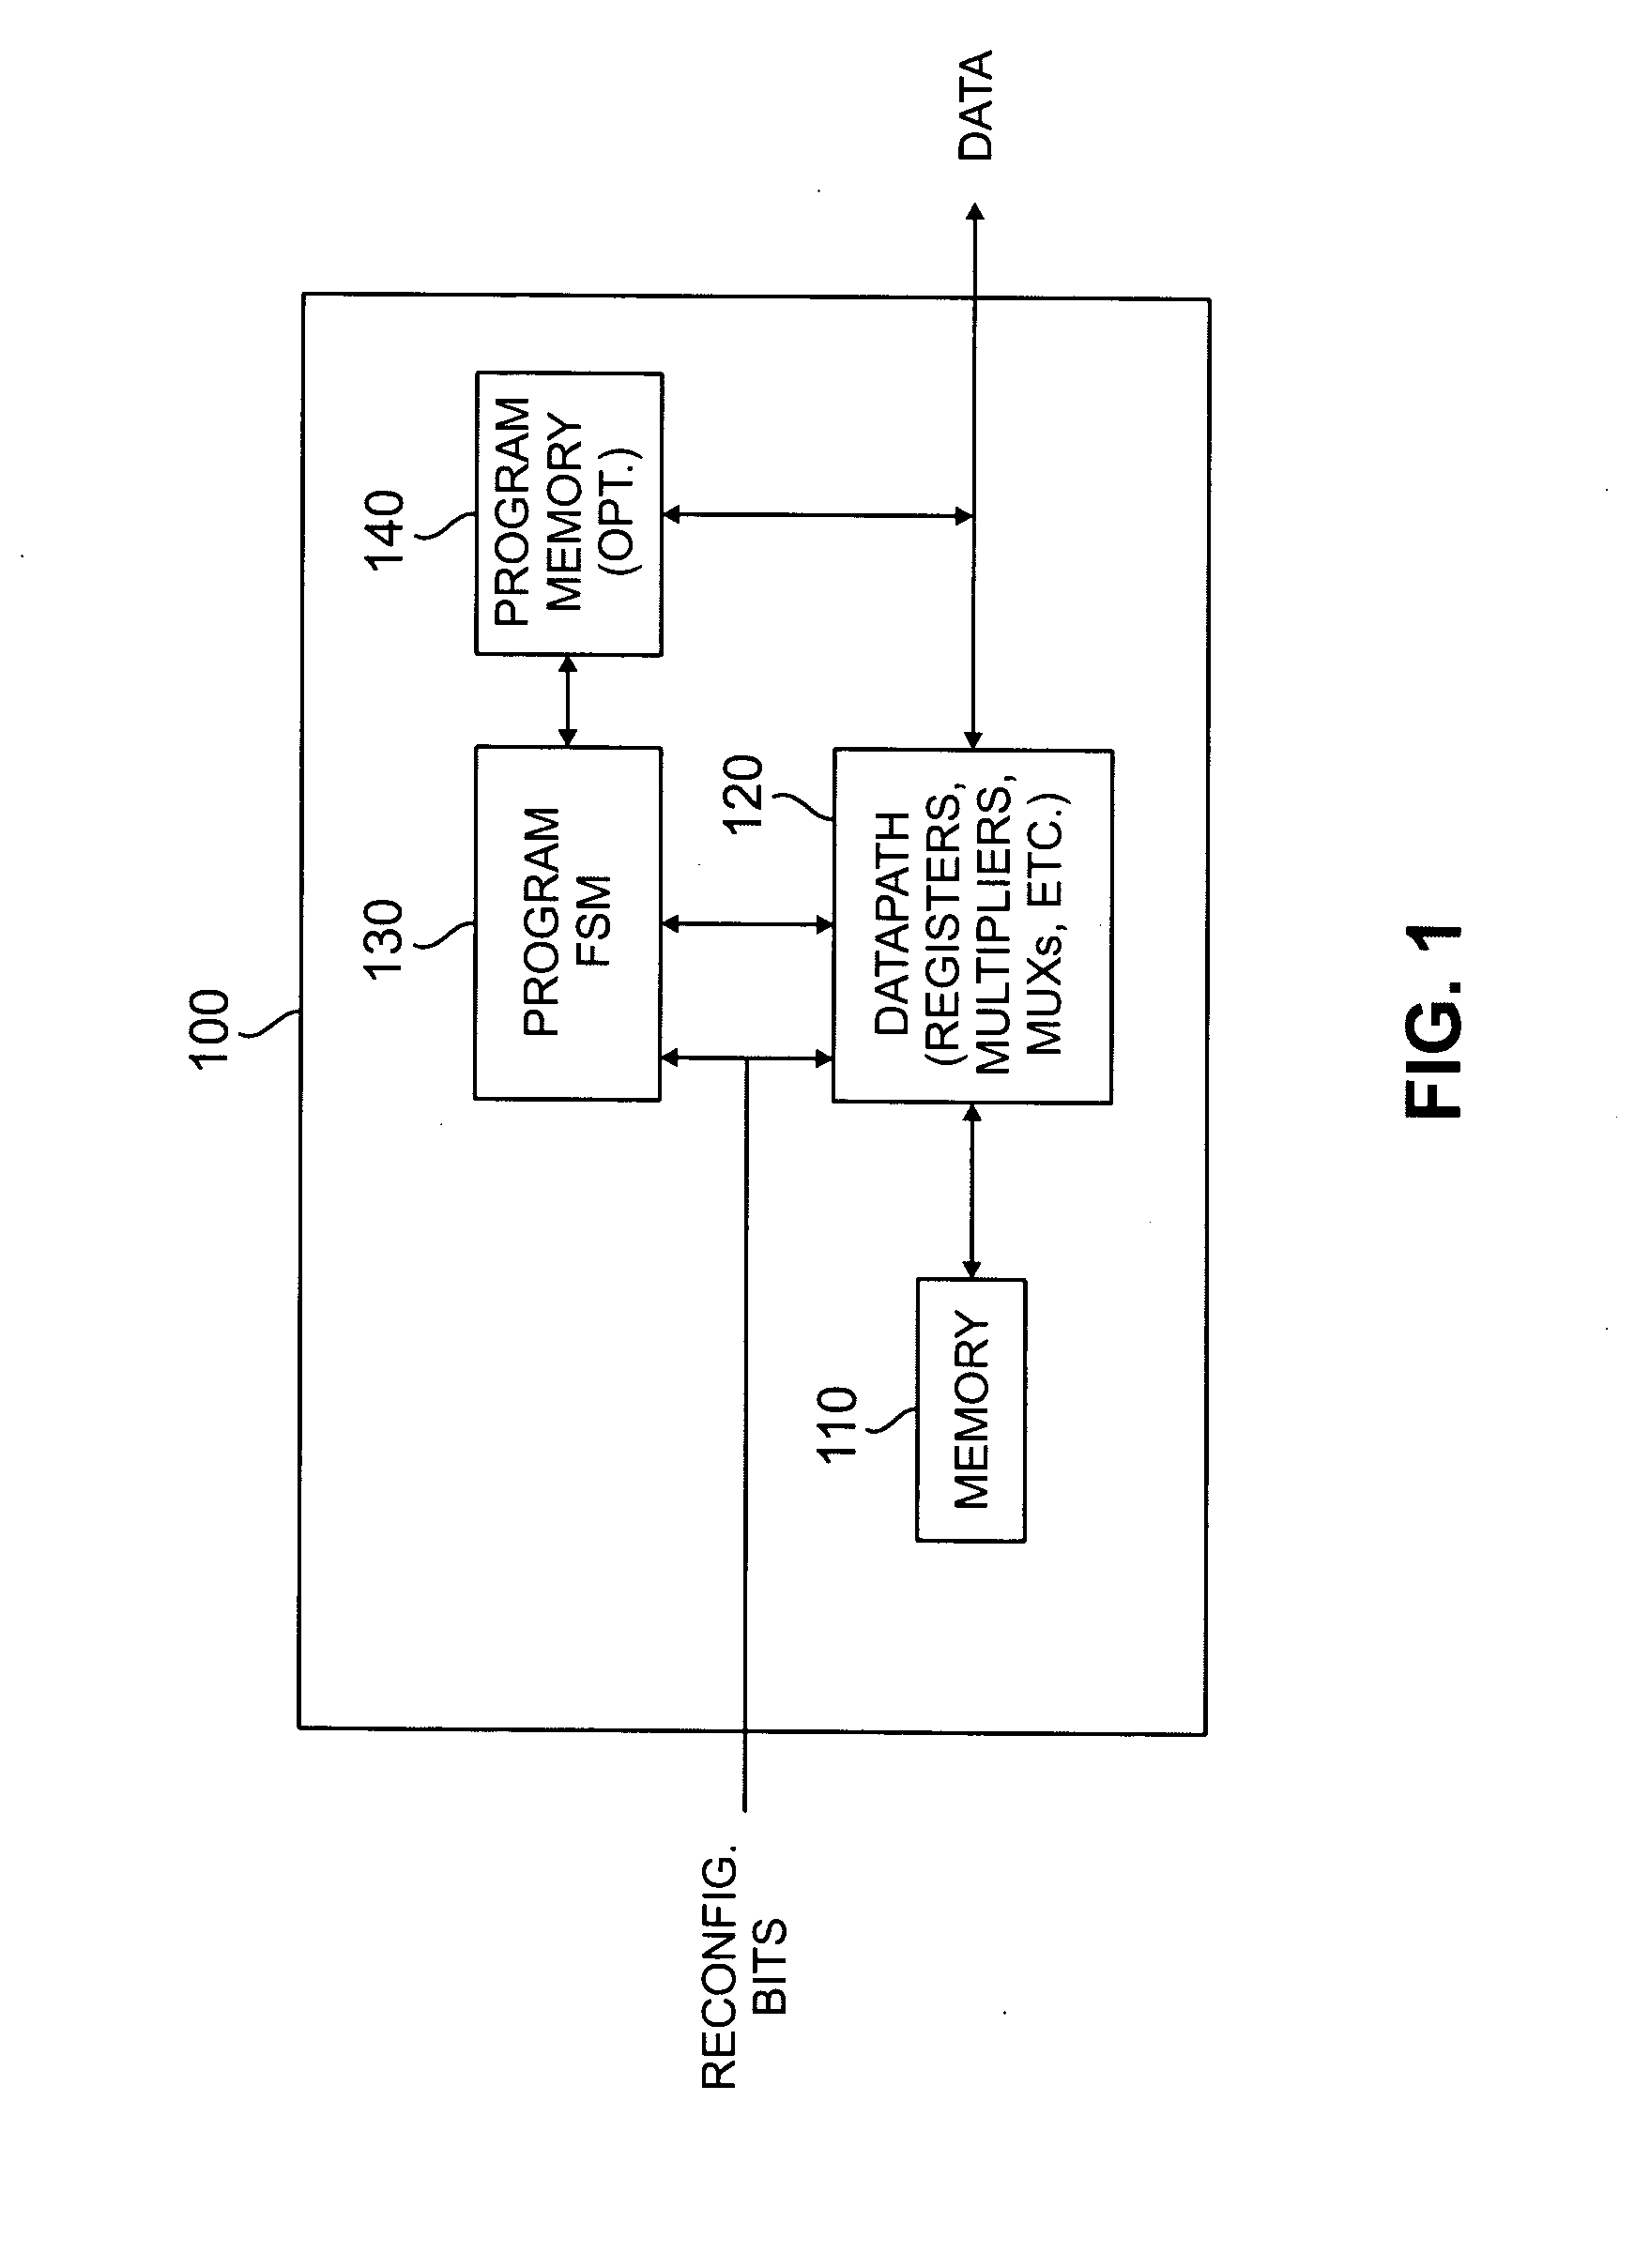 Unified stopping criteria for binary and duobinary turbo decoding in a software-defined radio system